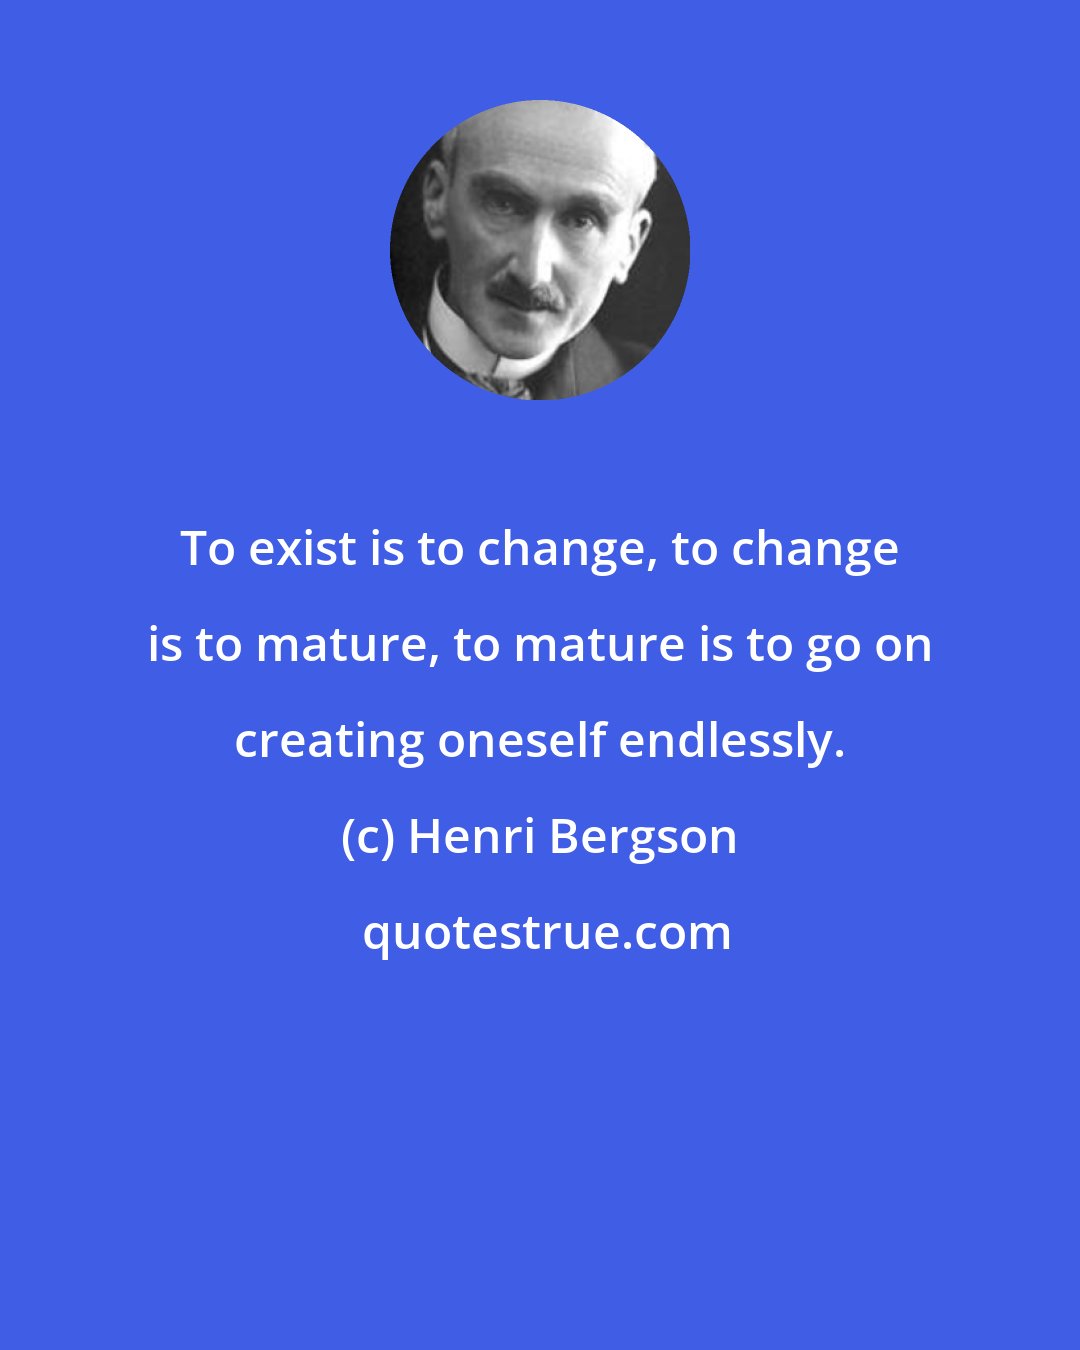 Henri Bergson: To exist is to change, to change is to mature, to mature is to go on creating oneself endlessly.